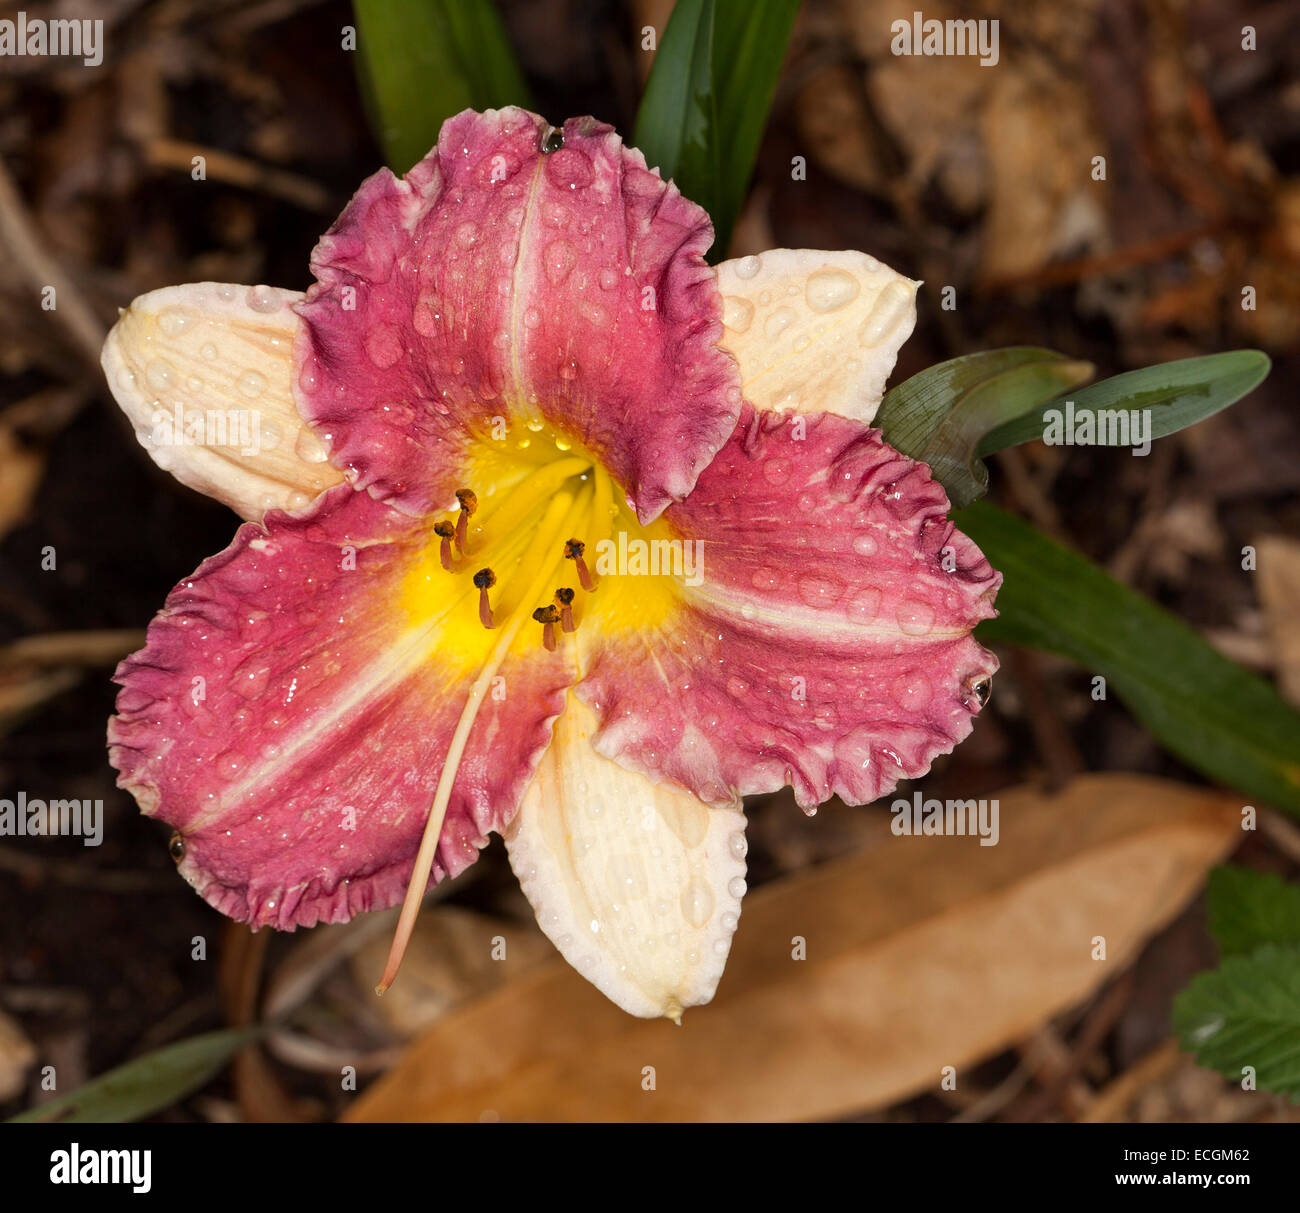 Spectacular bright red & cream daylily flower 'Roses in Snow', with yellow throat & raindrops on petals against dark background Stock Photo